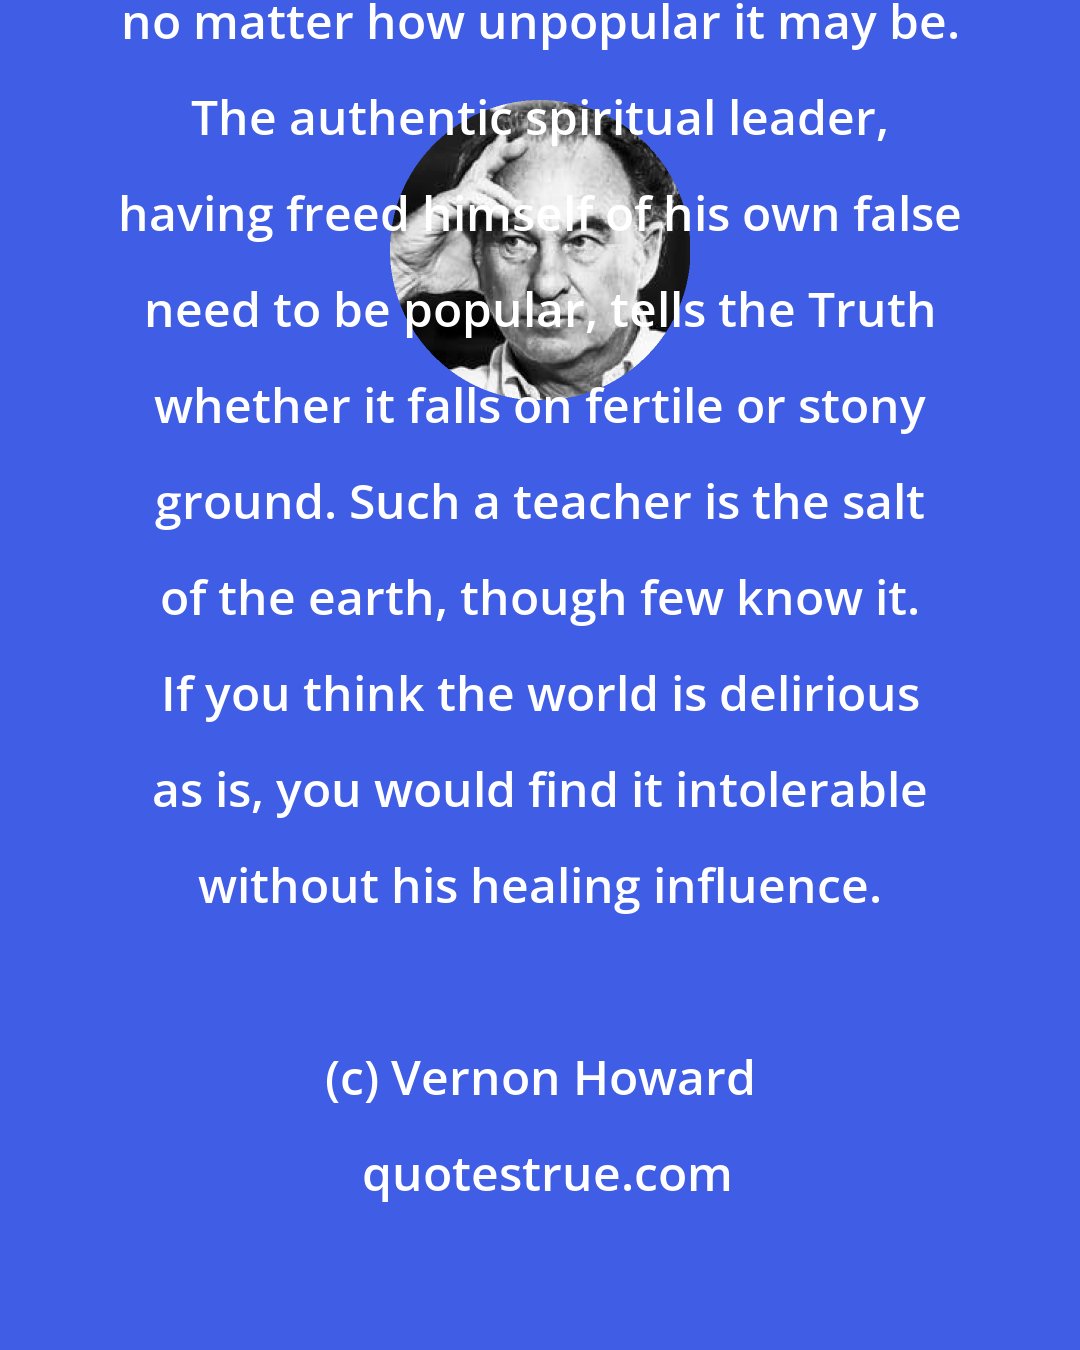 Vernon Howard: The Truth must be told at all costs, no matter how unpopular it may be. The authentic spiritual leader, having freed himself of his own false need to be popular, tells the Truth whether it falls on fertile or stony ground. Such a teacher is the salt of the earth, though few know it. If you think the world is delirious as is, you would find it intolerable without his healing influence.